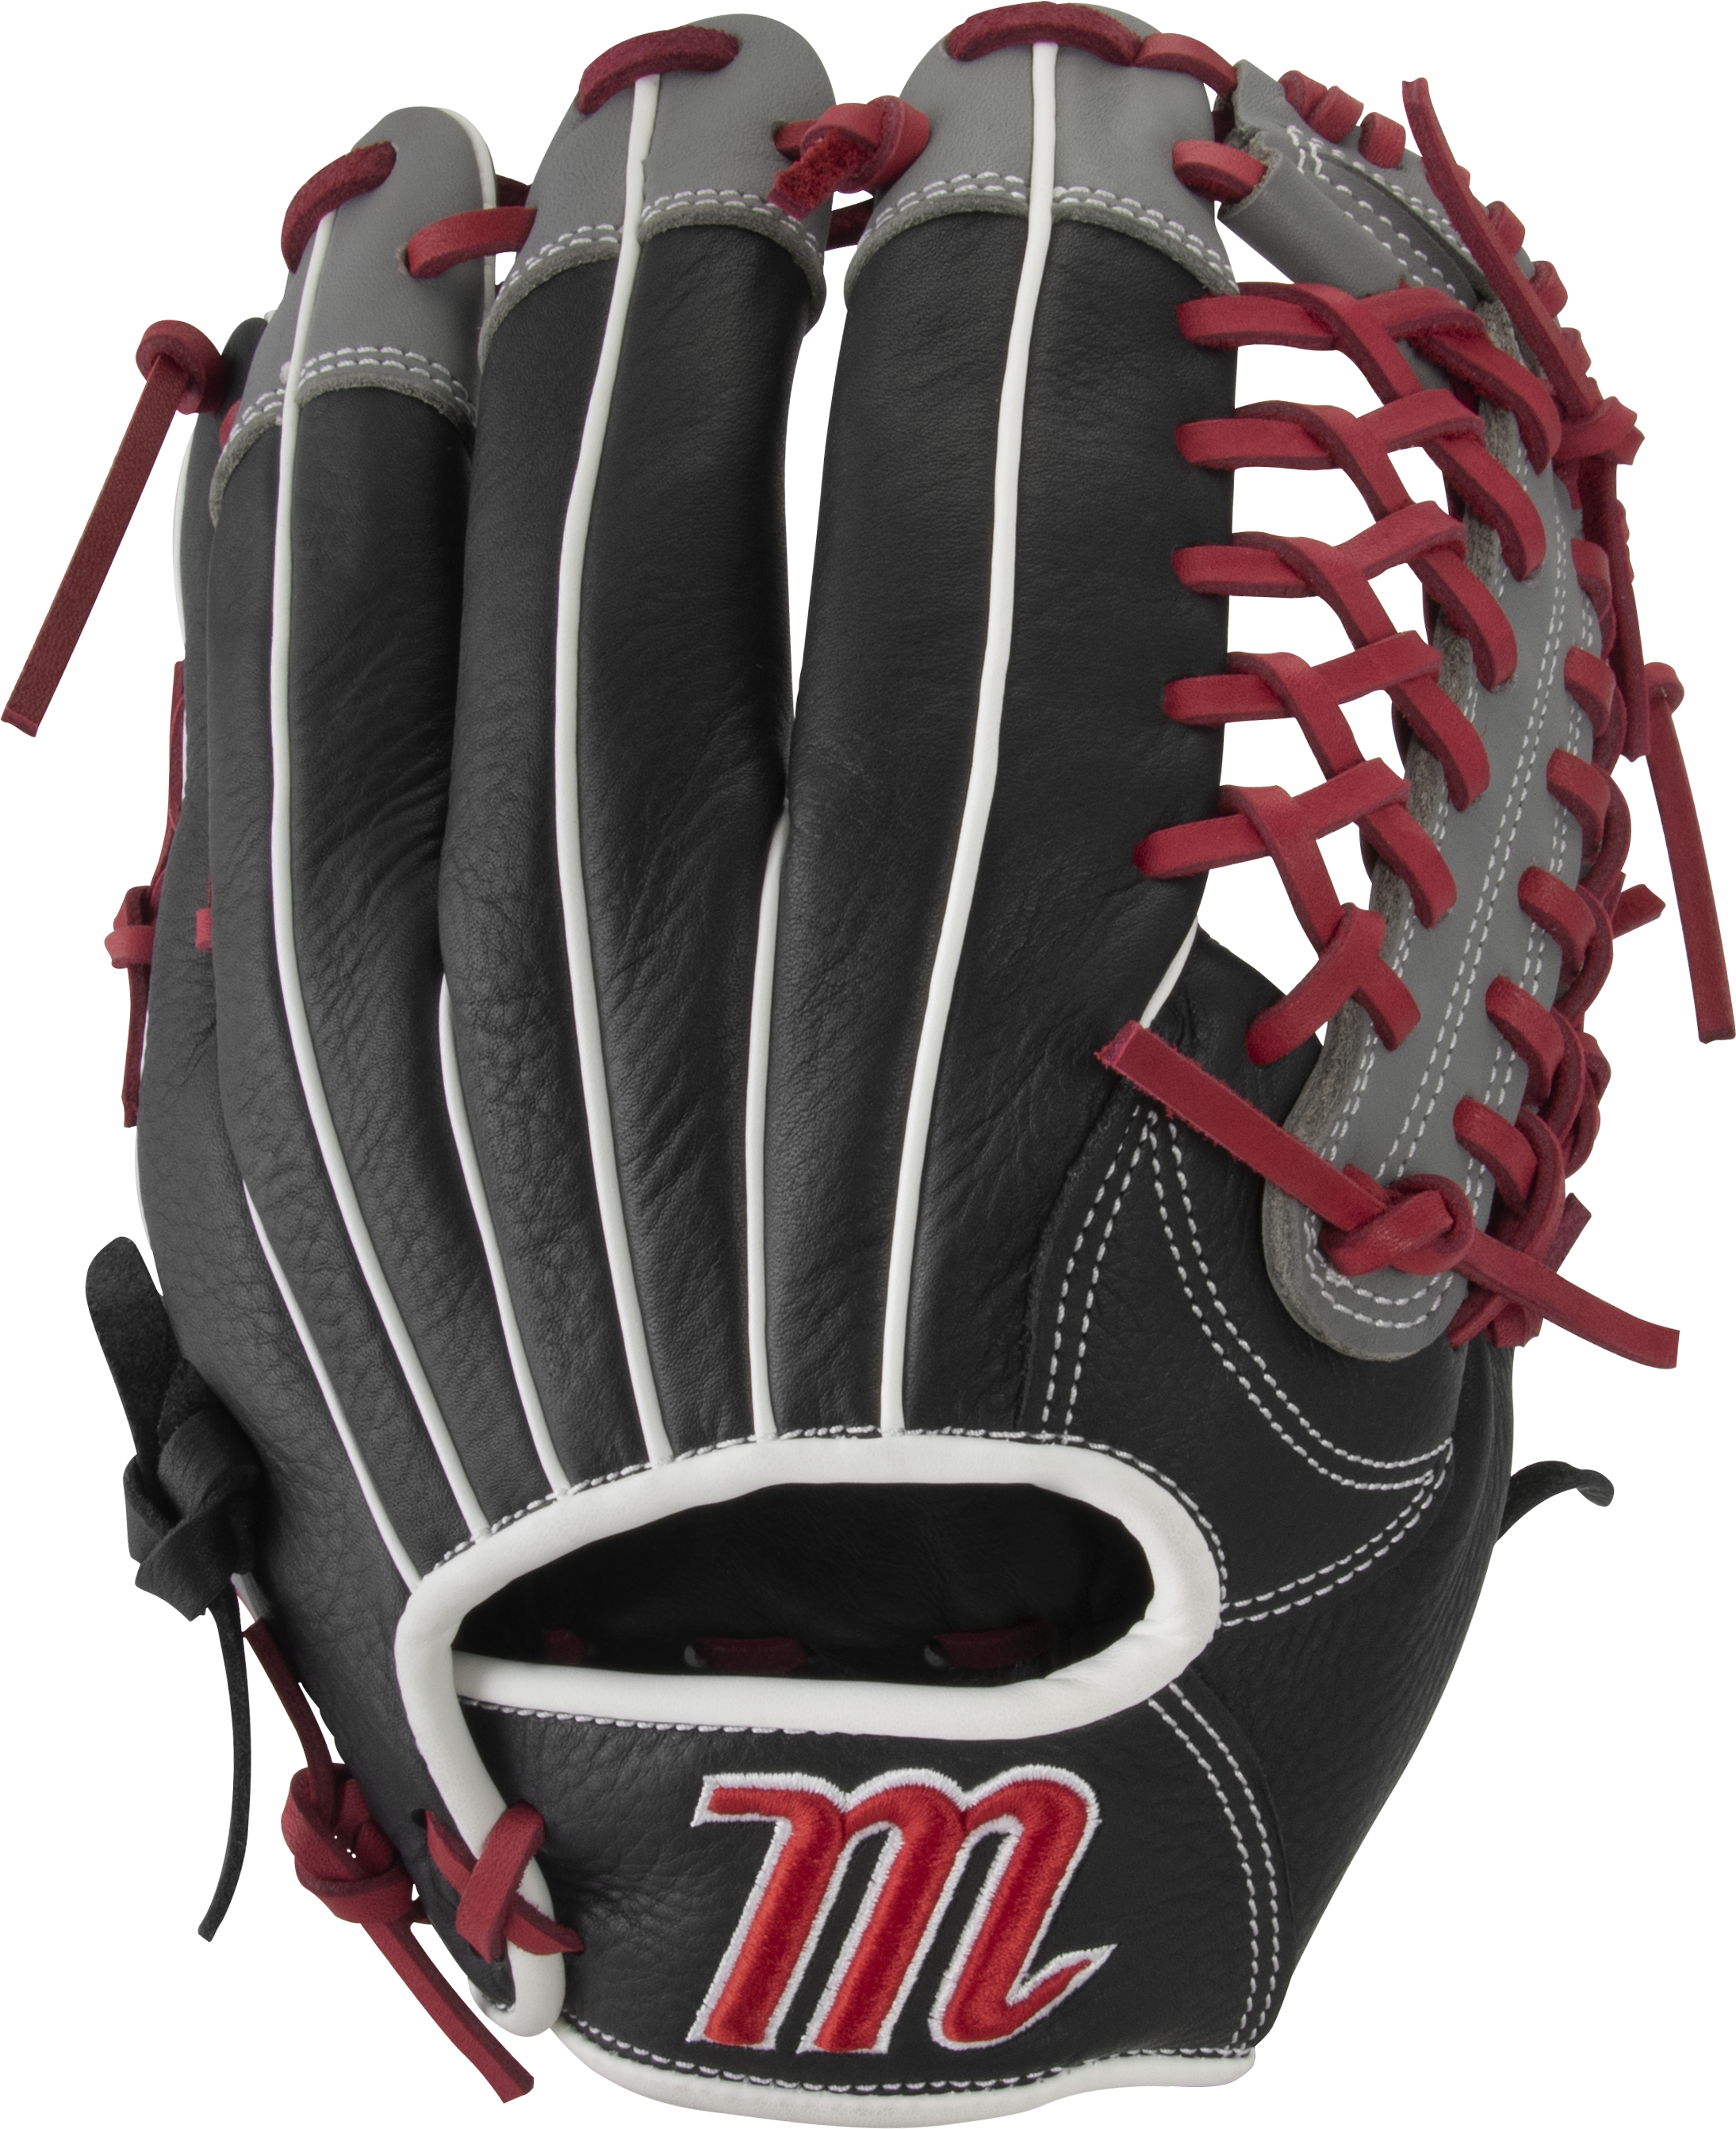 marucci-vermilion-youth-baseball-glove-vr1175y-11-75-trap-web-right-hand-throw MFGVR1175Y-BKR-RightHandThrow Marucci 849817099650 Oiled cowhide leather shell and padded leather palm lining Reinforced finger